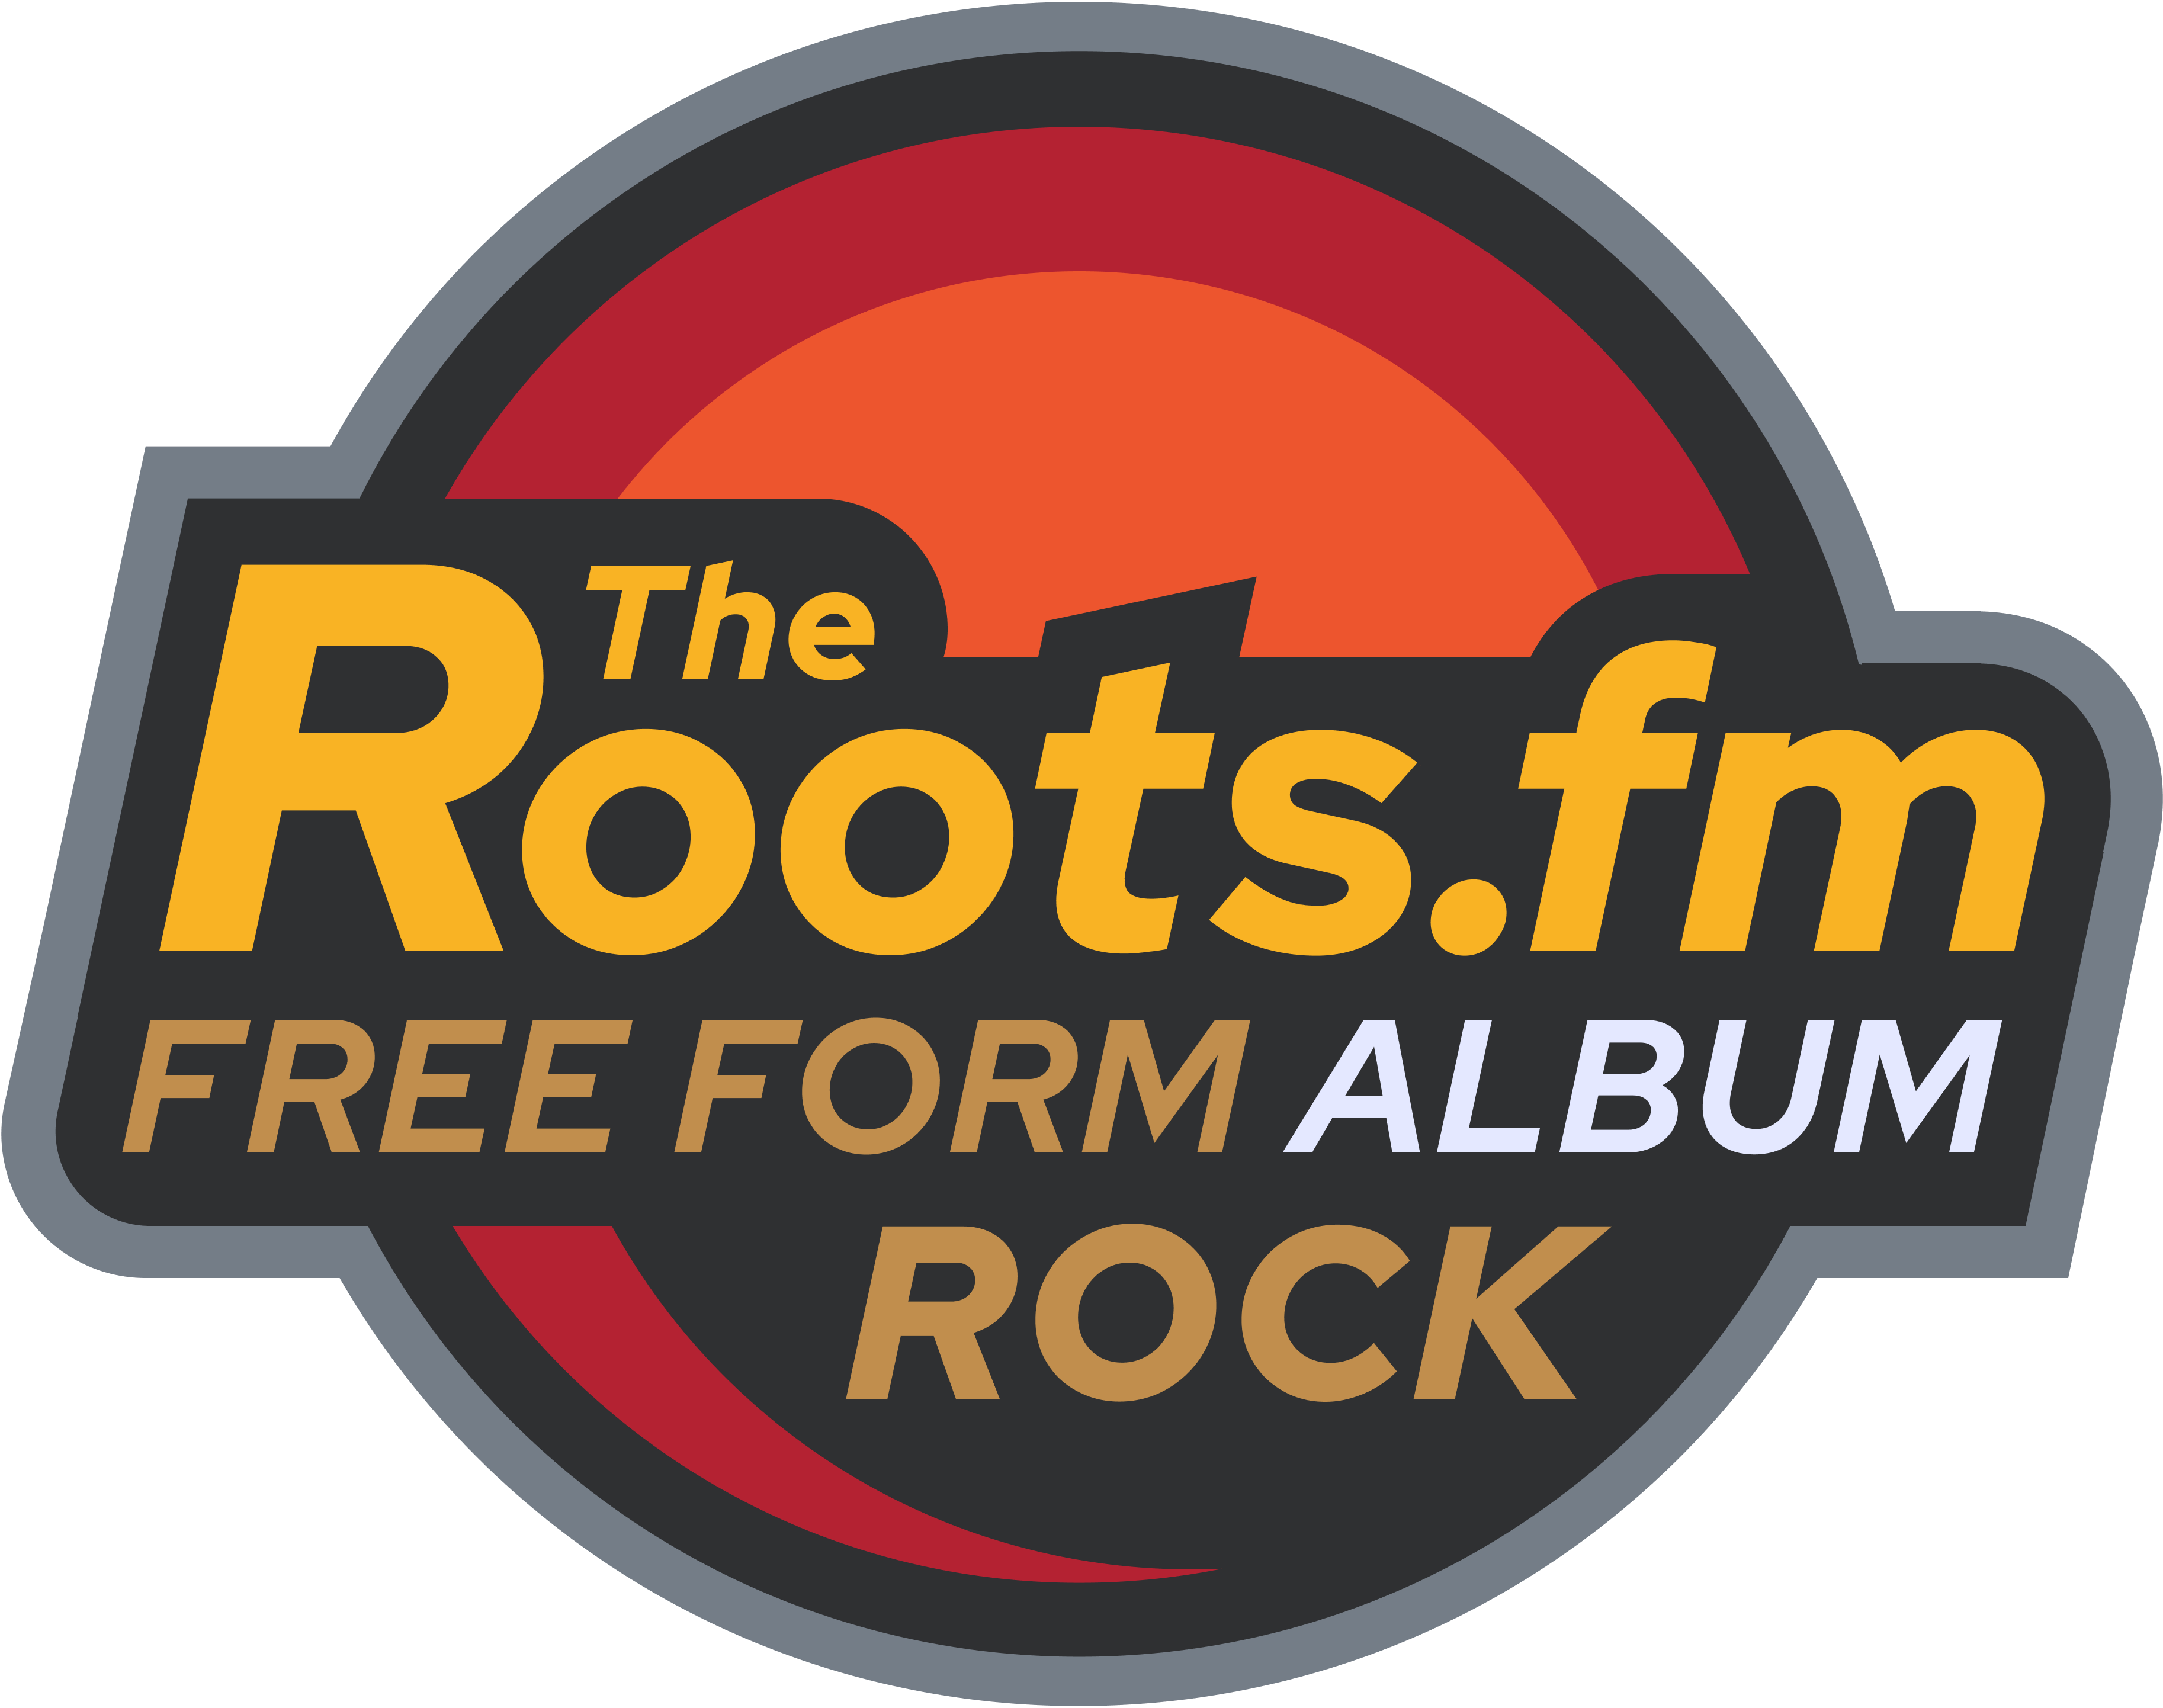 TheRoots.fm